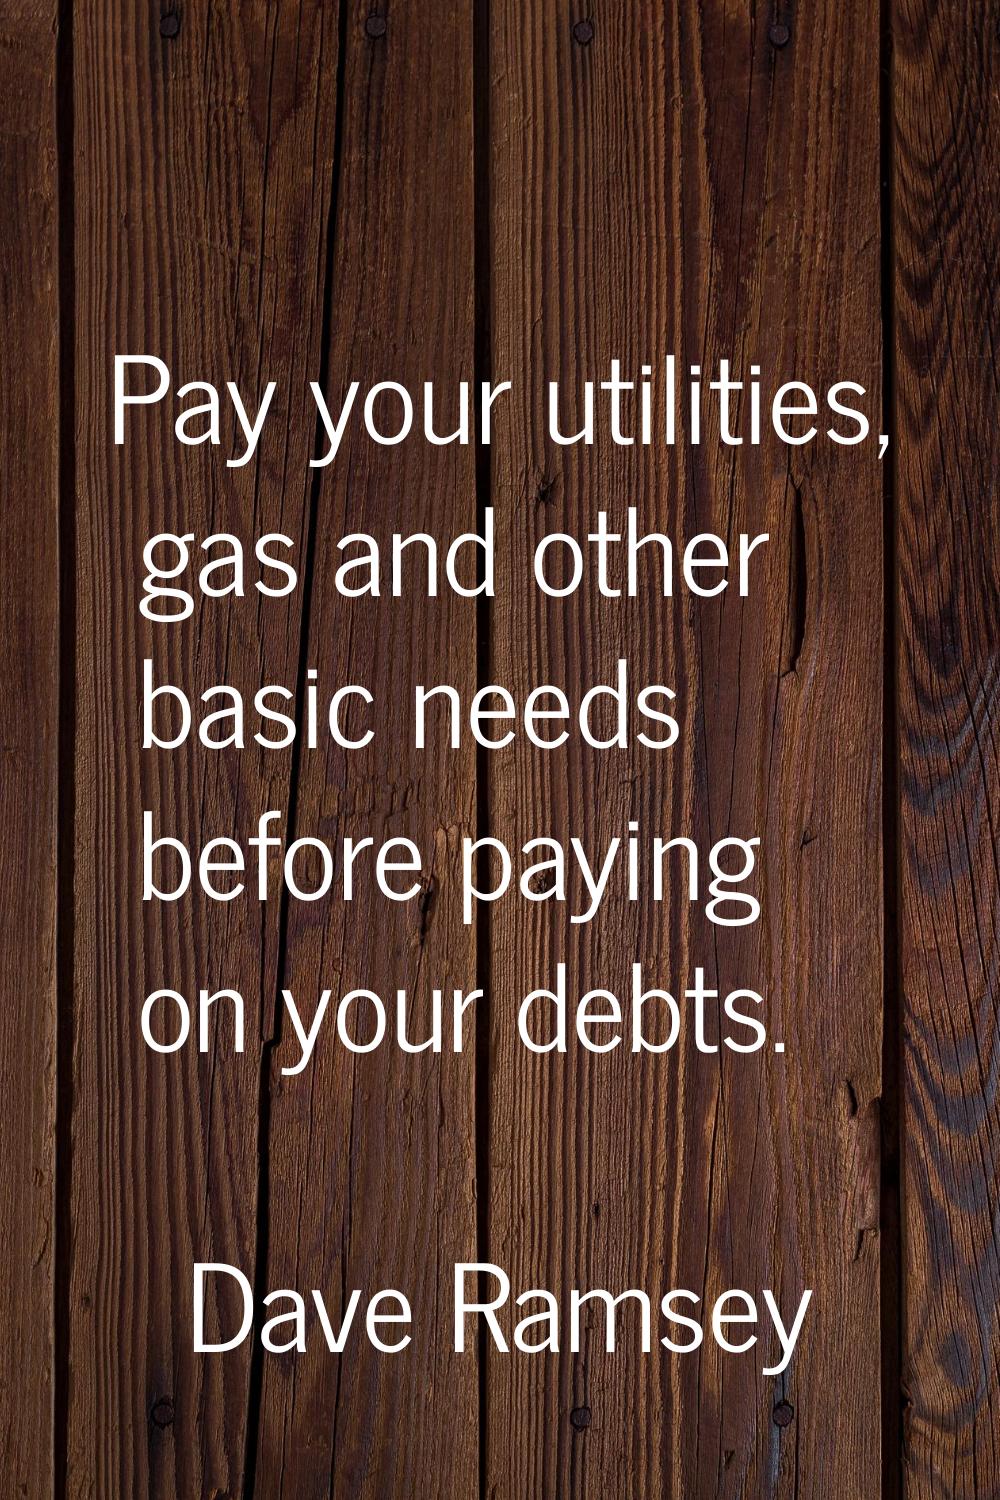 Pay your utilities, gas and other basic needs before paying on your debts.